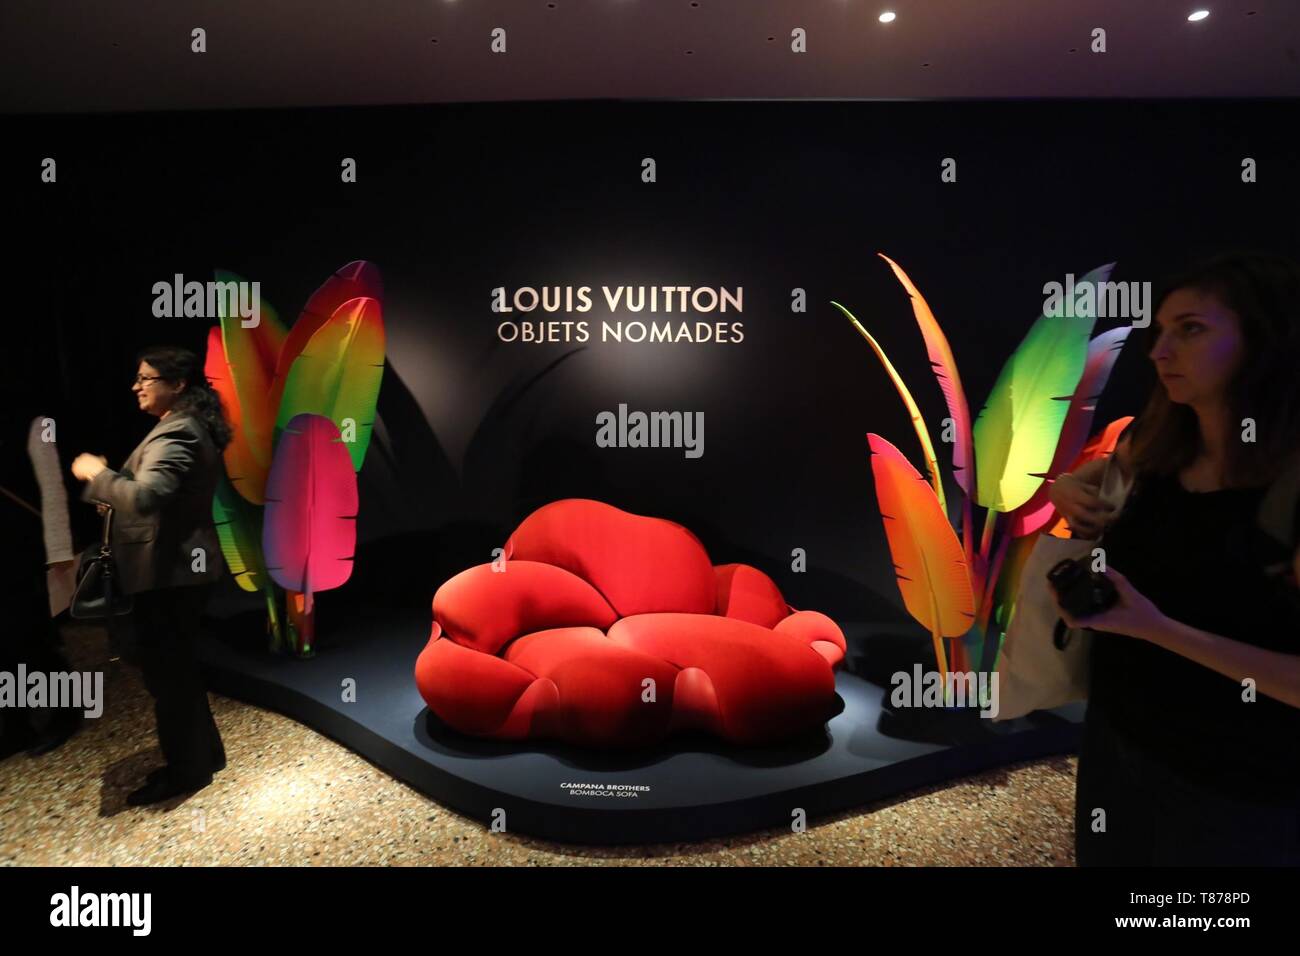 The Objets Nomades by Louis Vuitton at Fuorisalone 2023